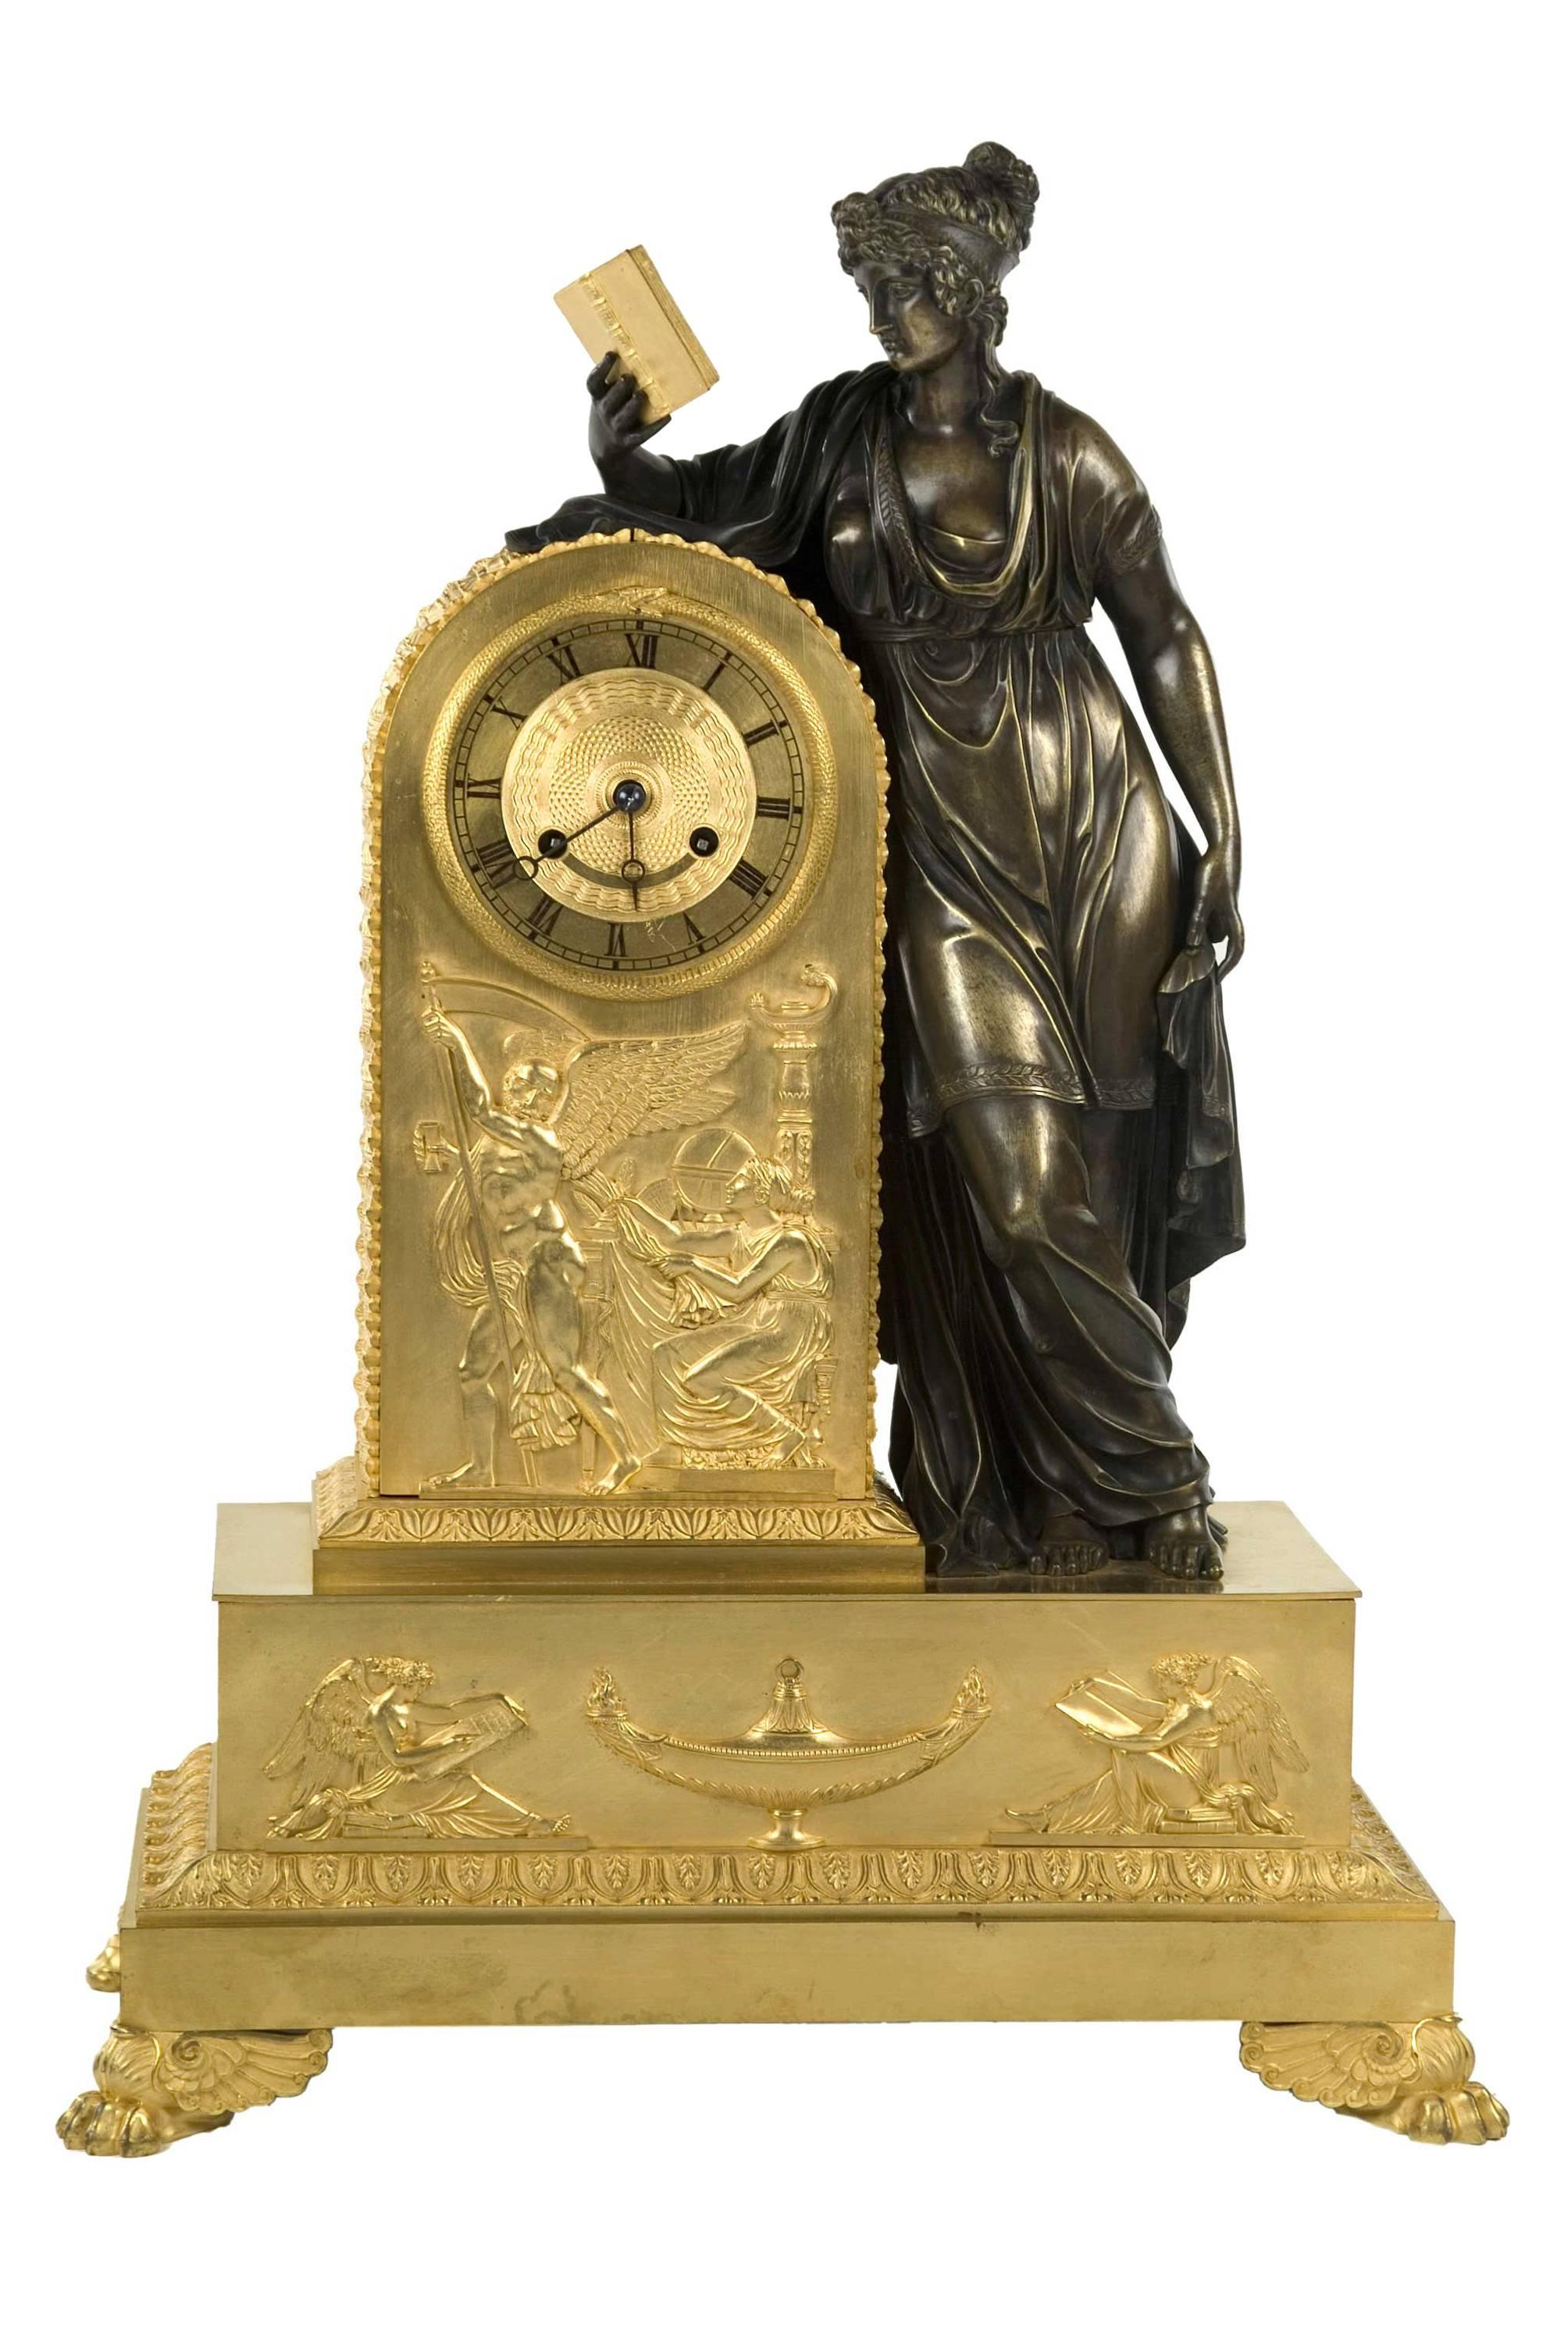 Gilt and patinated bronze period French Empire clock of Clio, the muse of history and writing. Clio was responsible for conveying her wisdom of history into the minds of the human race.

A similar model of clock can be found in the Royal